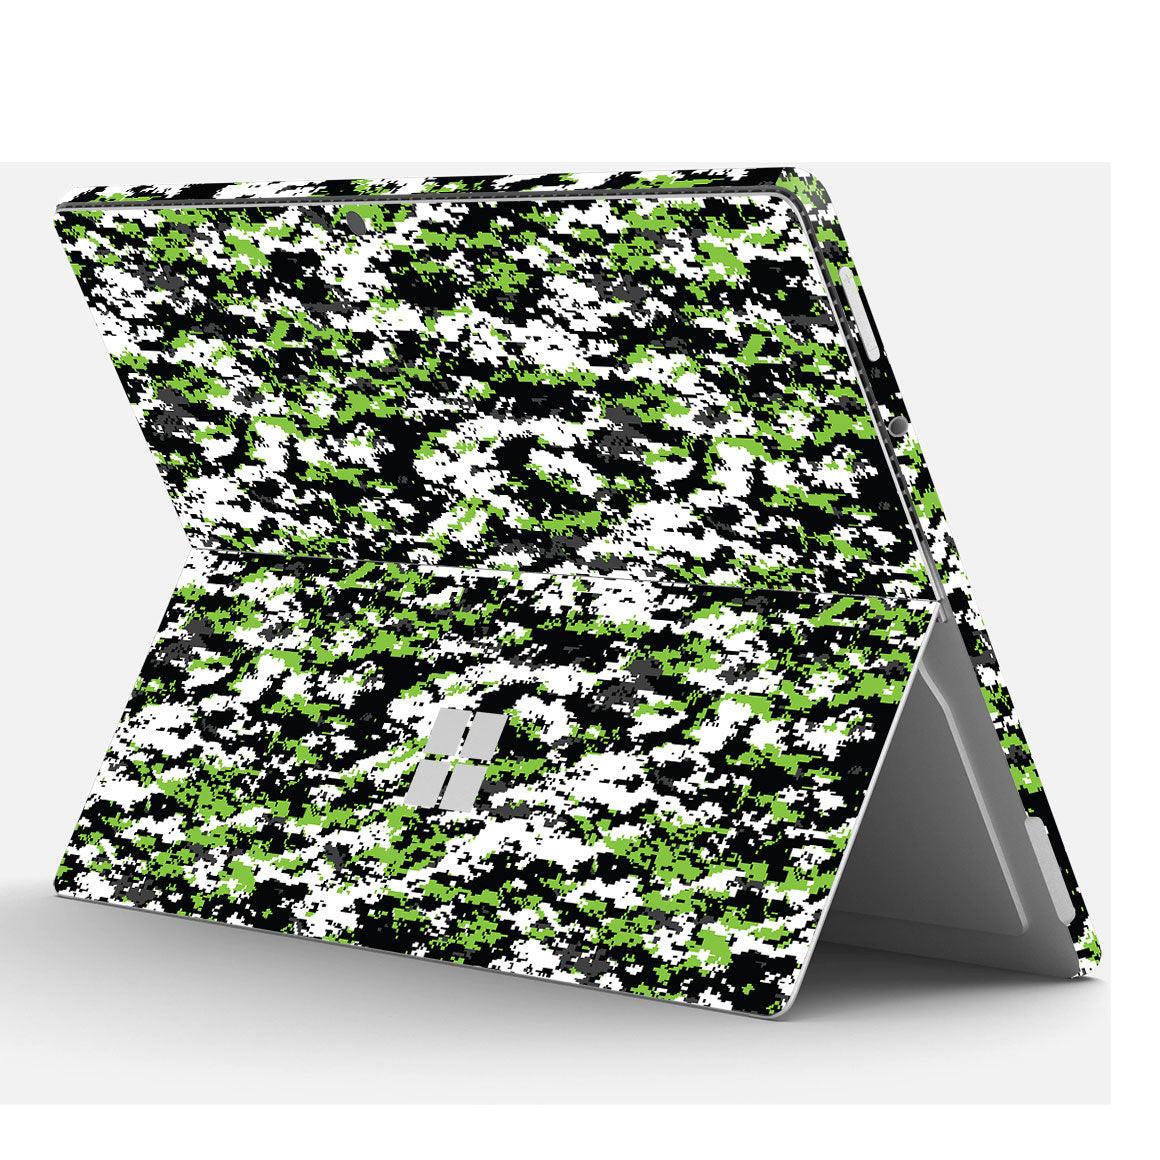 Surface Pro X Surface Pro 7 Skin Microsoft Surface Pro 4 Decal Tear Down  Surface Skin Sticker Tablet Back Cover -  Denmark